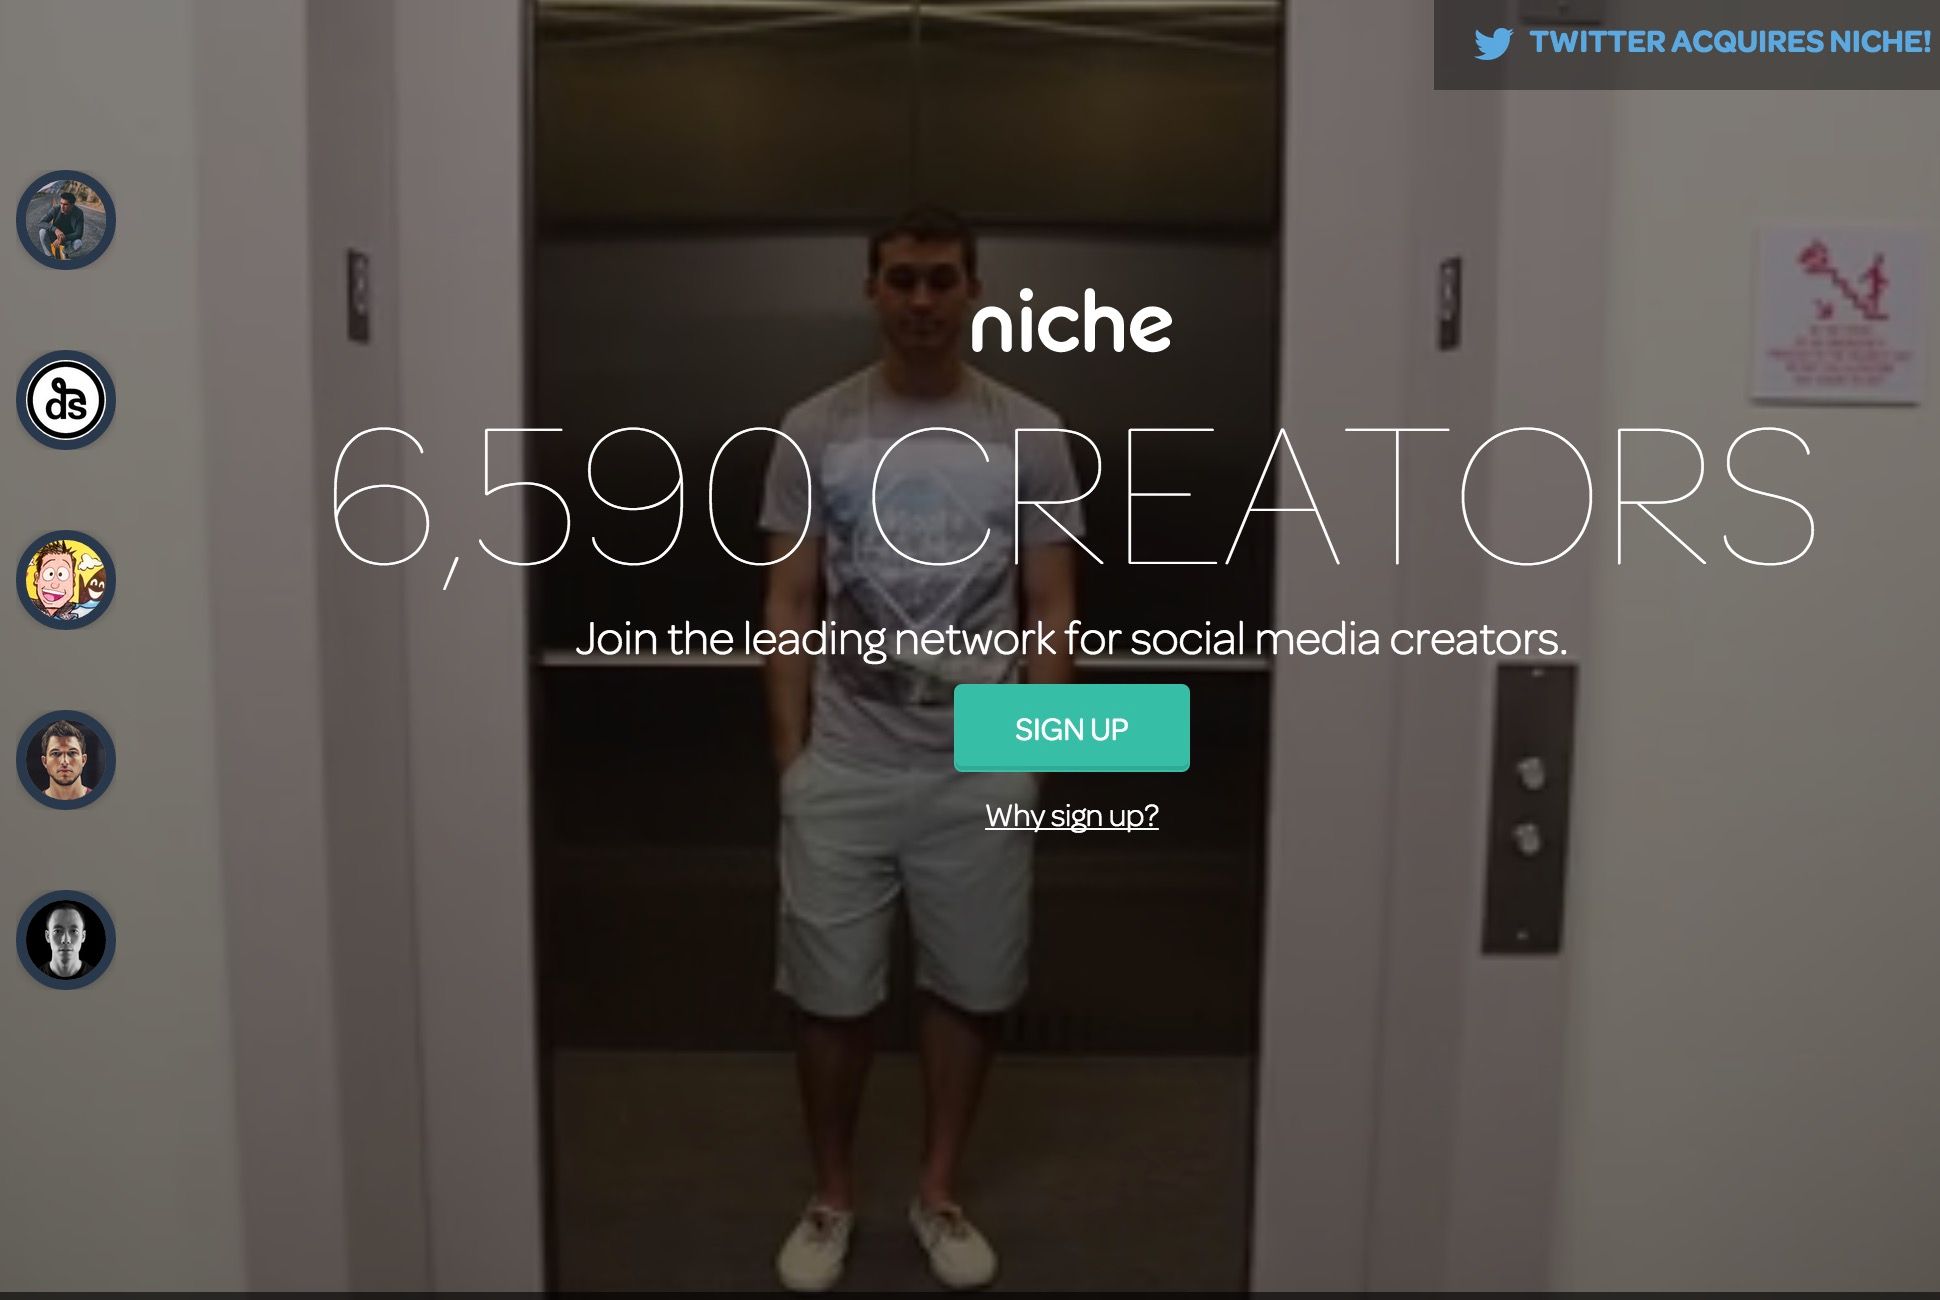 twitter buys niche has it officially become a social media talent agency  image 1